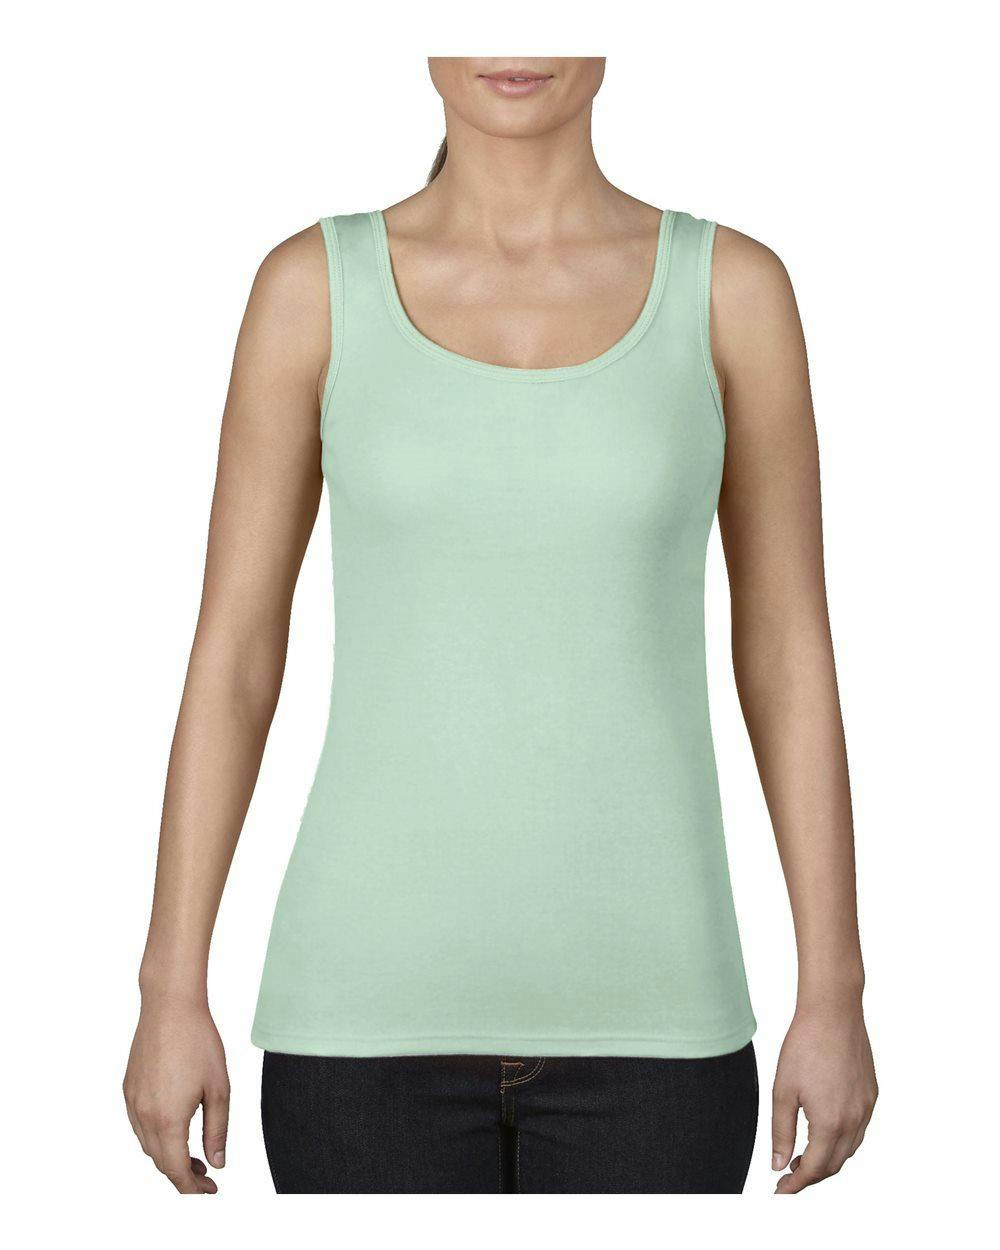 Image for Garment-Dyed Women’s Midweight Tank Top - 3060L